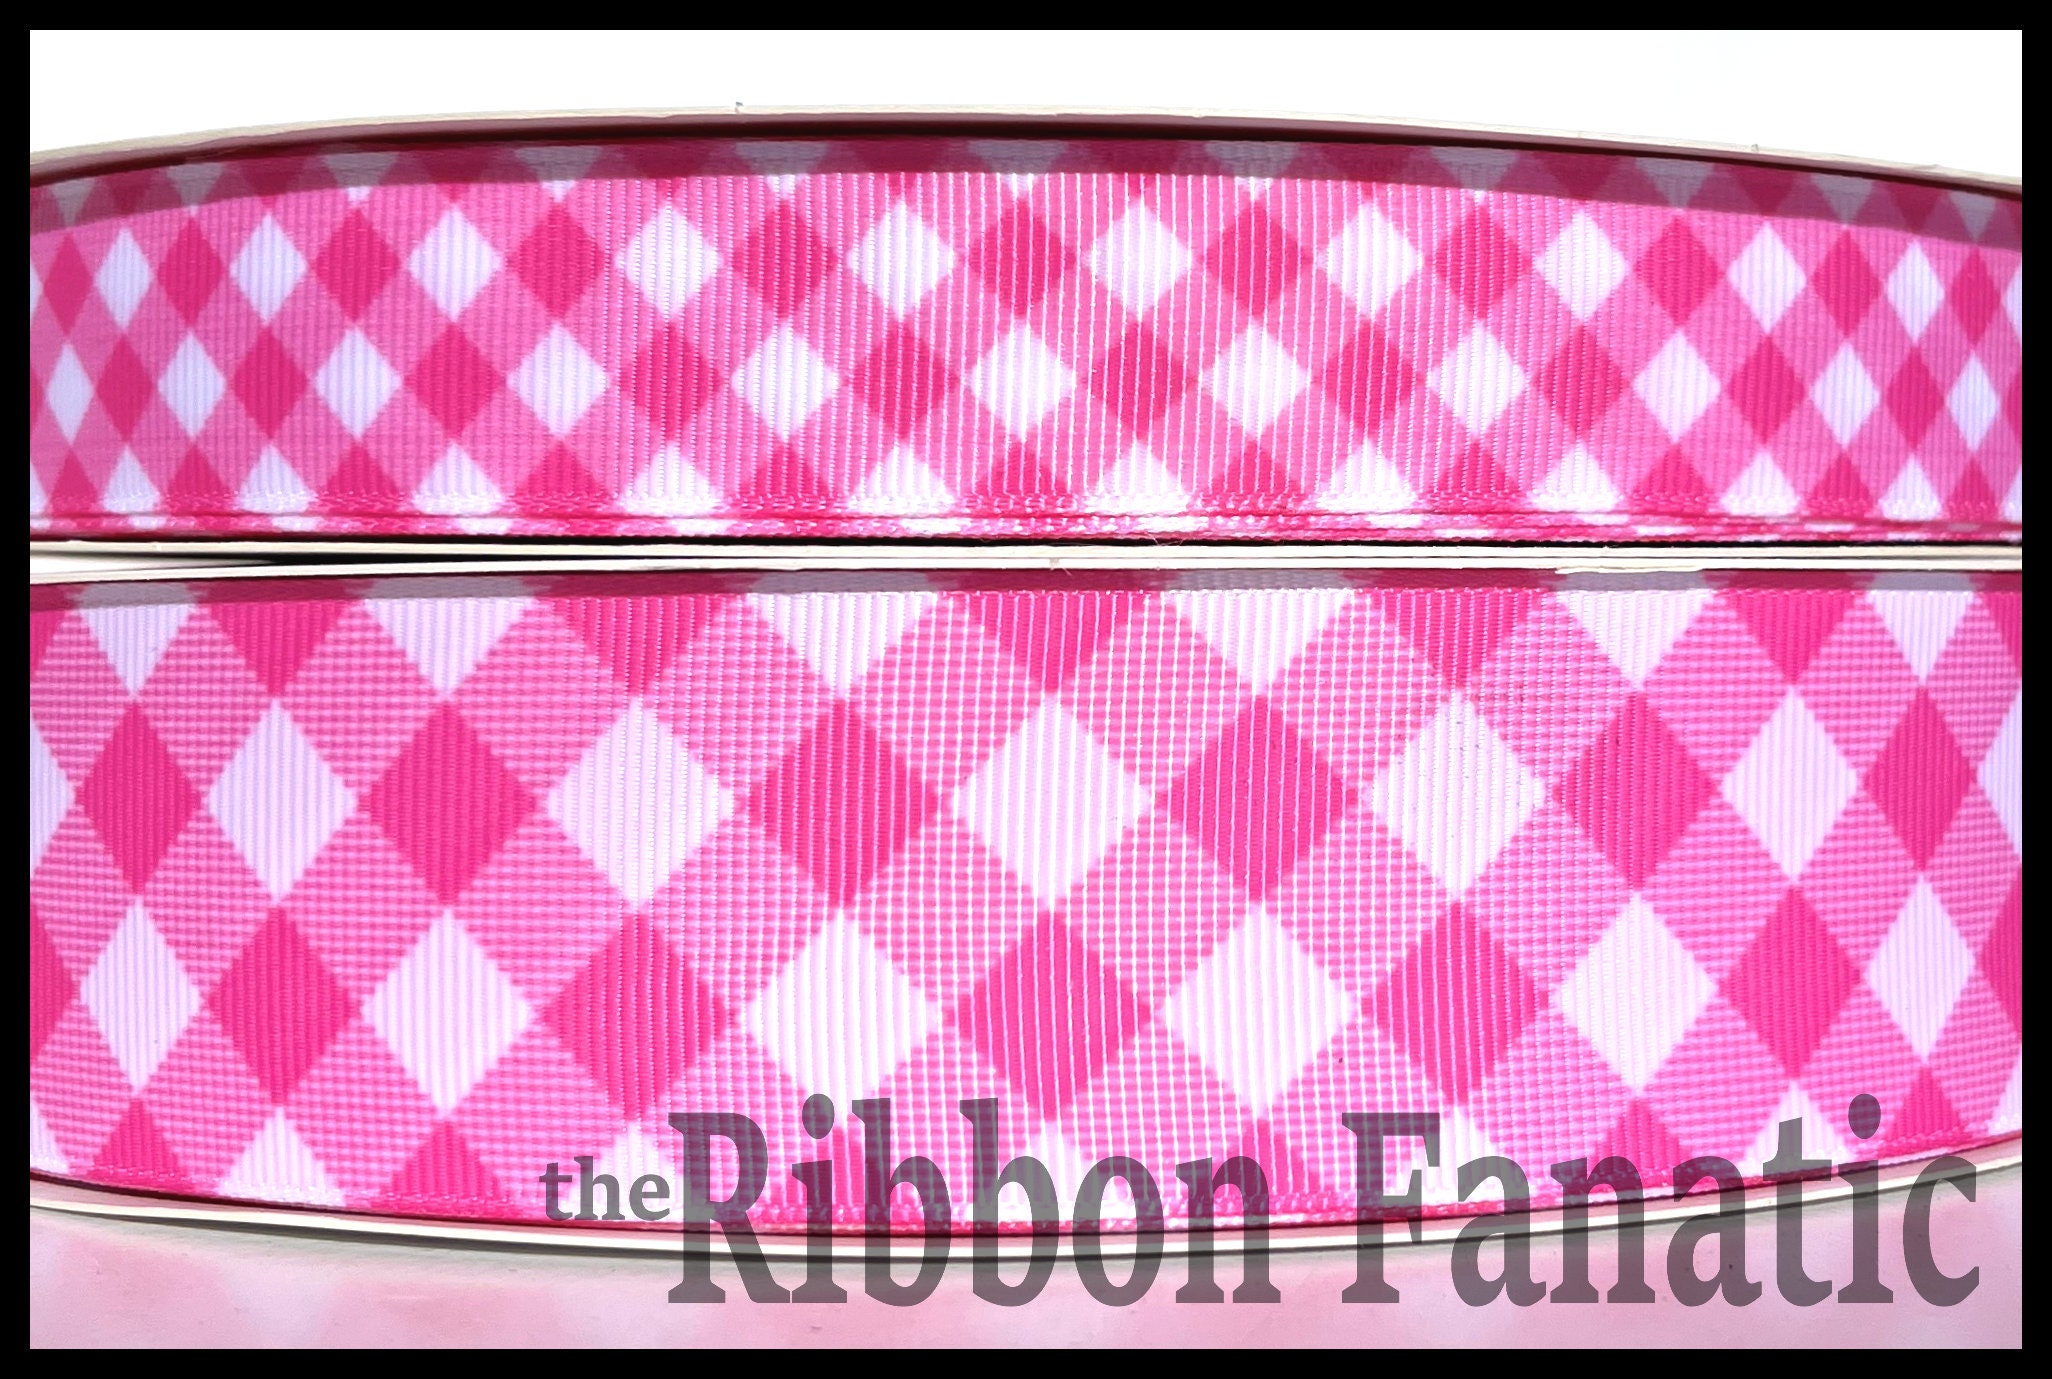 5 yds 7/8 or 1.5 Hot Pink and White Gingham Grosgrain Ribbon